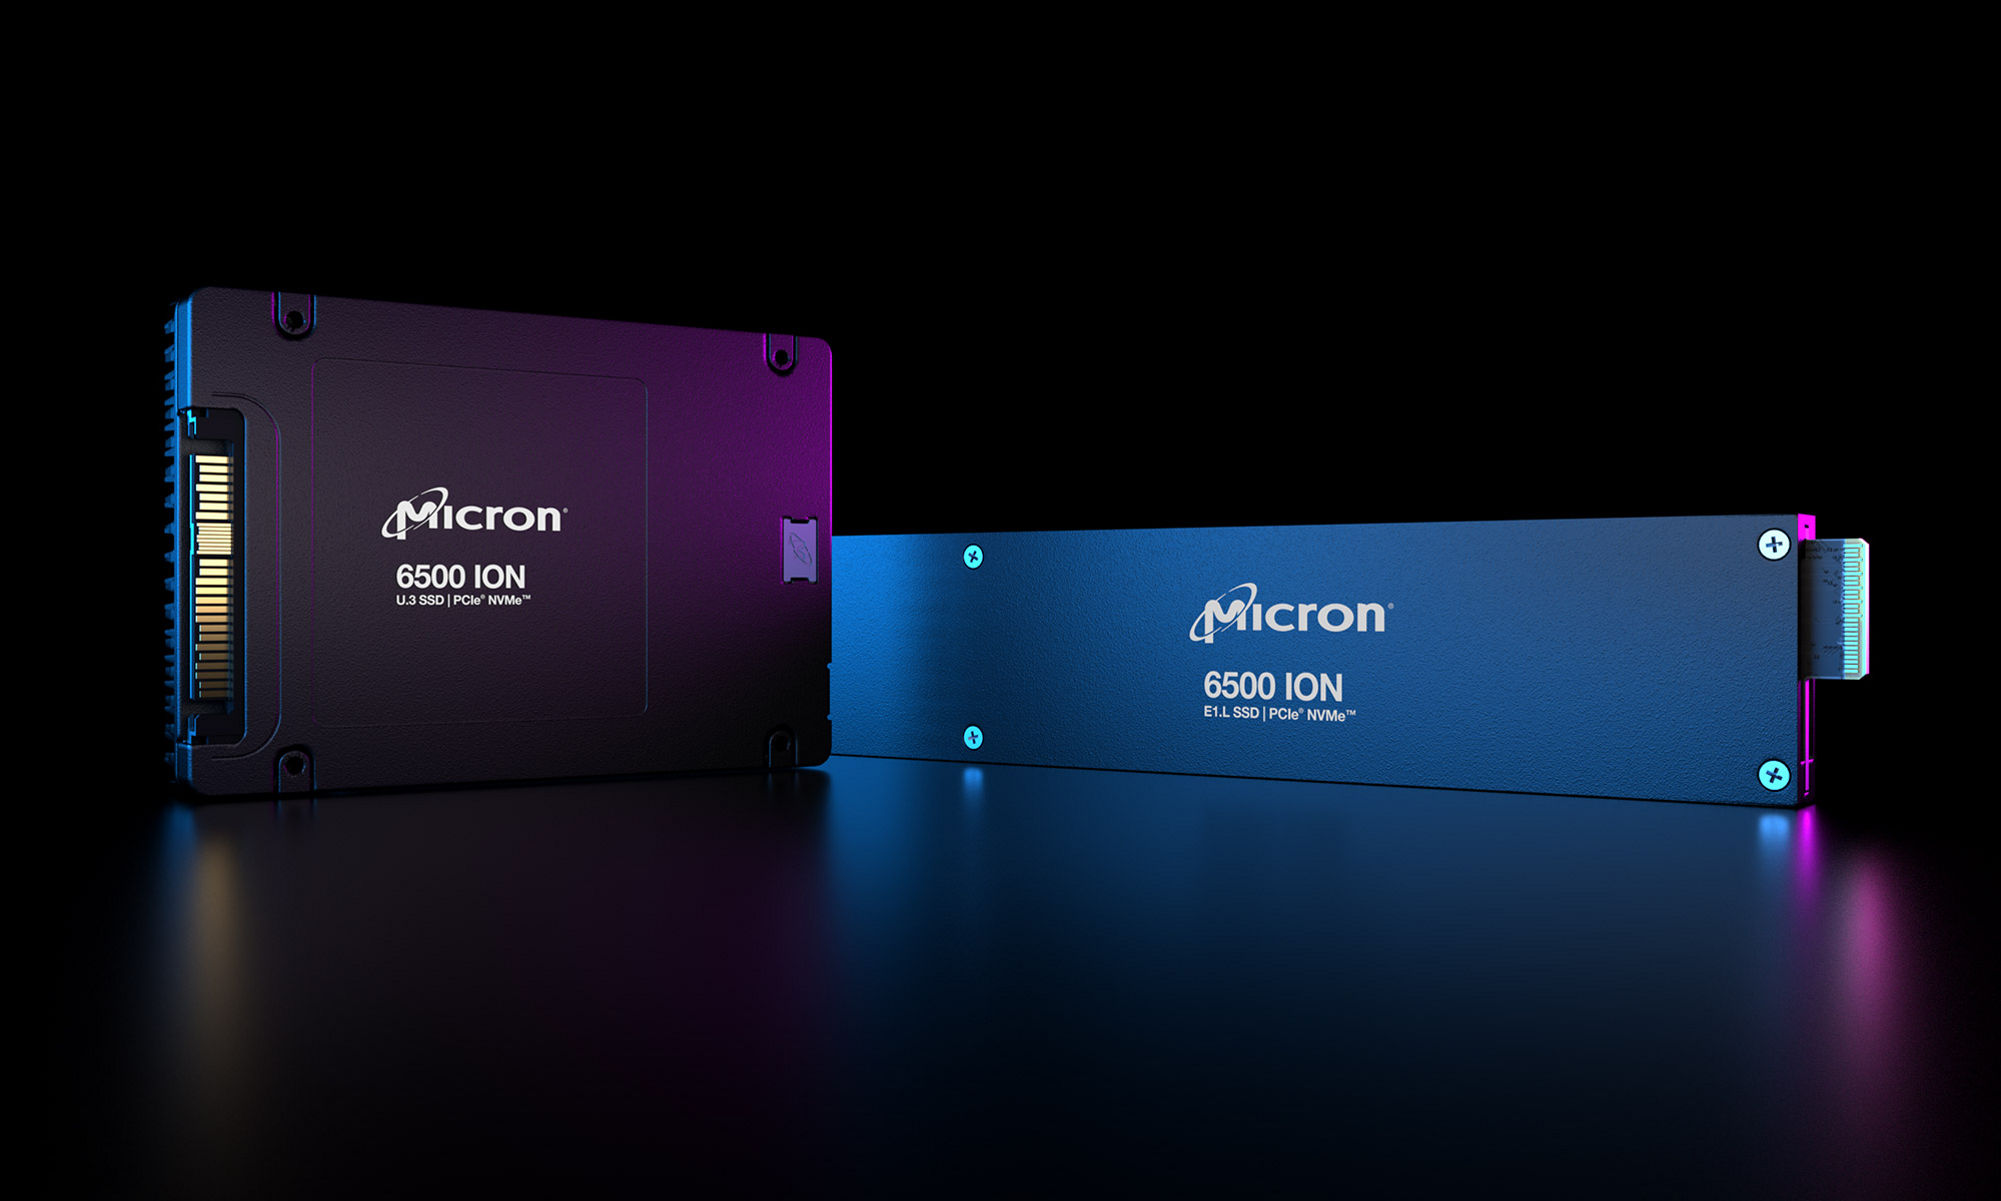 Two Micron 6500 ION SSDs 